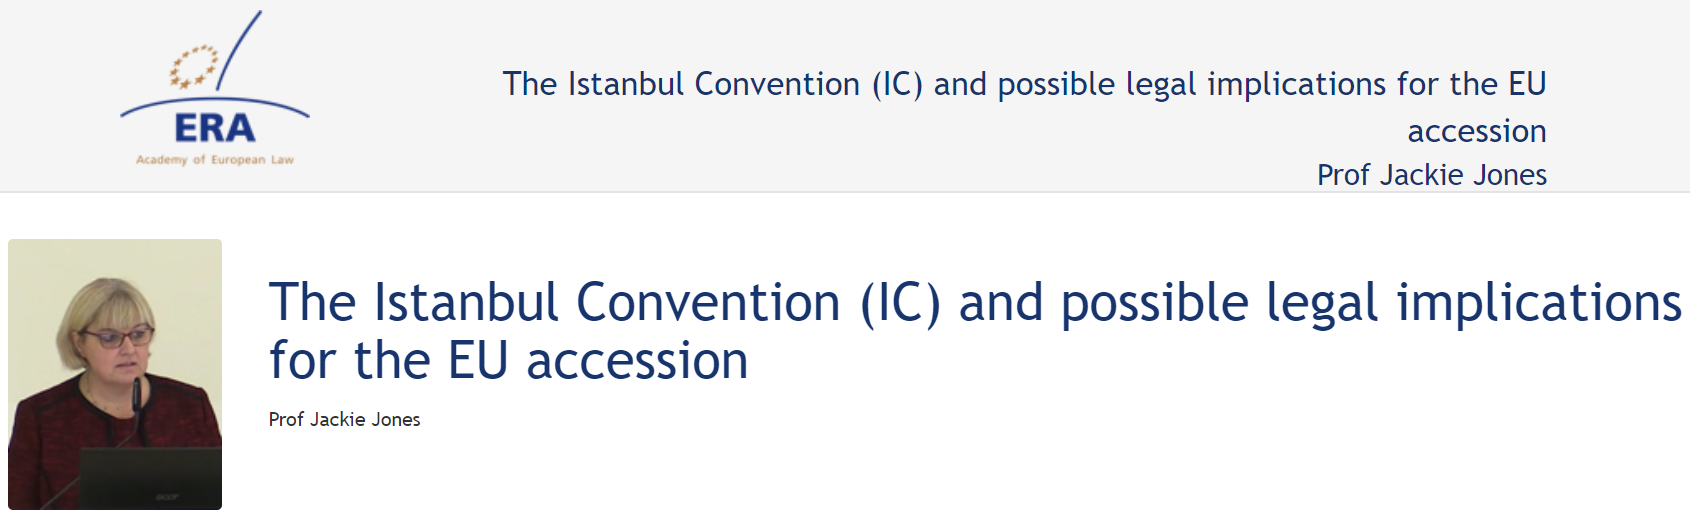 Prof Jackie Jones (November 2018): The Istanbul Convention (IC) and possible legal implications for the EU accession